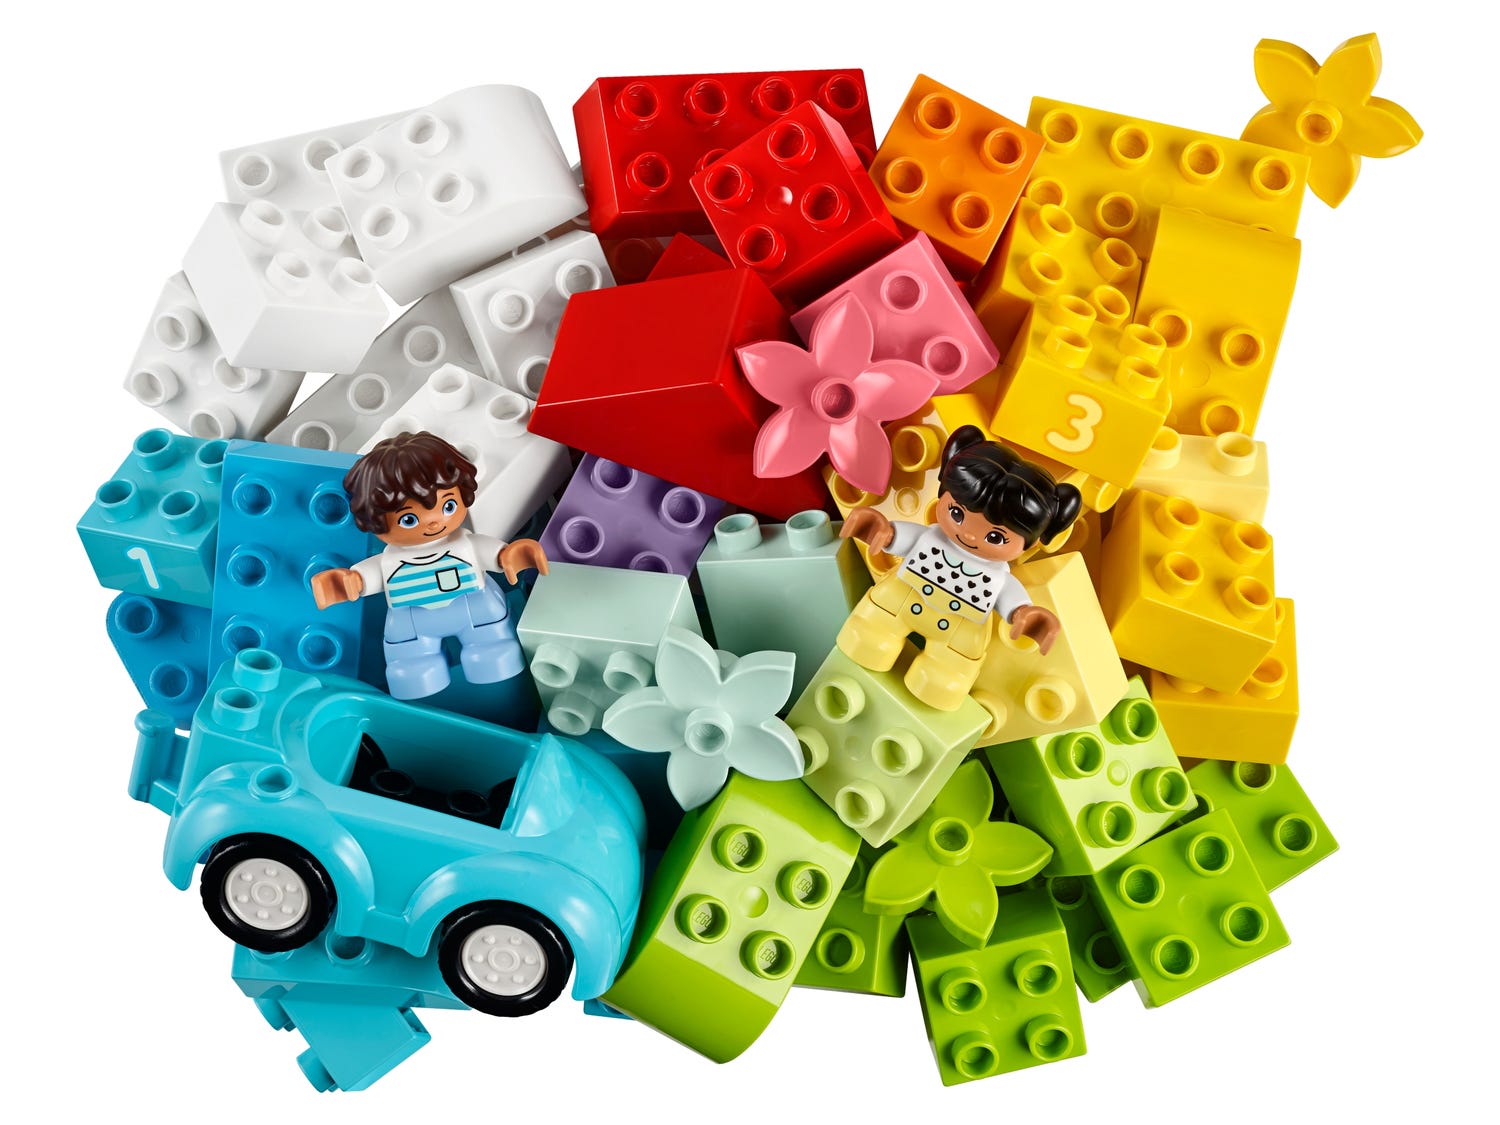 Brick Box 10913 | DUPLO® | Buy online at the Official LEGO® Shop GB